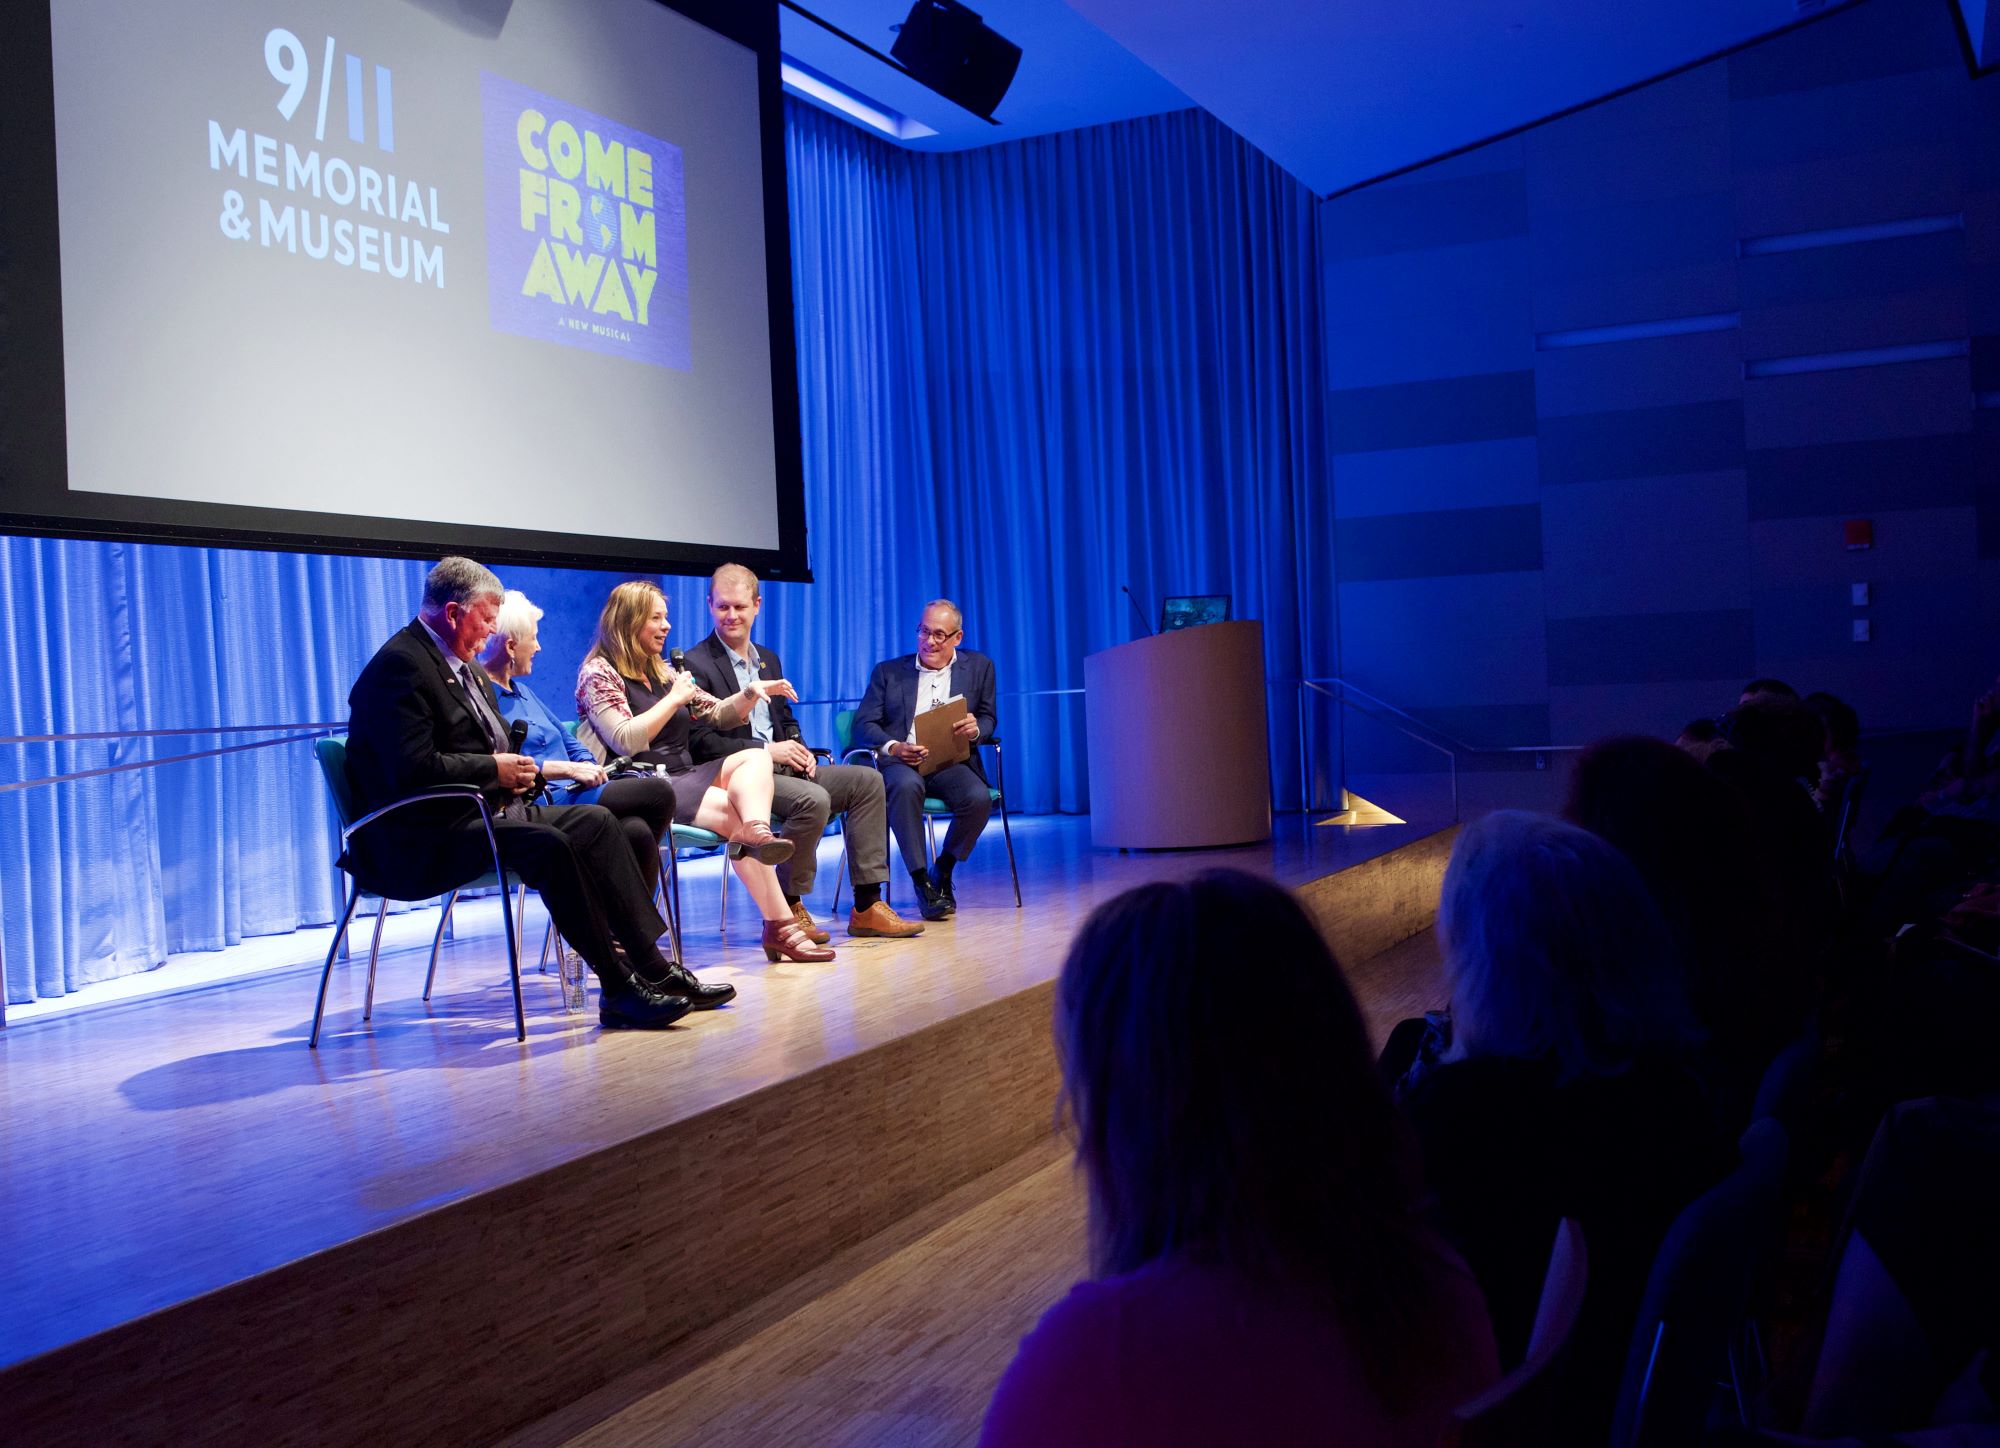 People behind the award-winning new musical “Come From Away” take part in the public program, Come From Away. They include two women and two men. Clifford Chanin, the executive vice president and deputy director for museum programs, sits next to the four attendees. Members of the audience can be seen in the foreground, their profiles bathed in the blue light of the stage. 